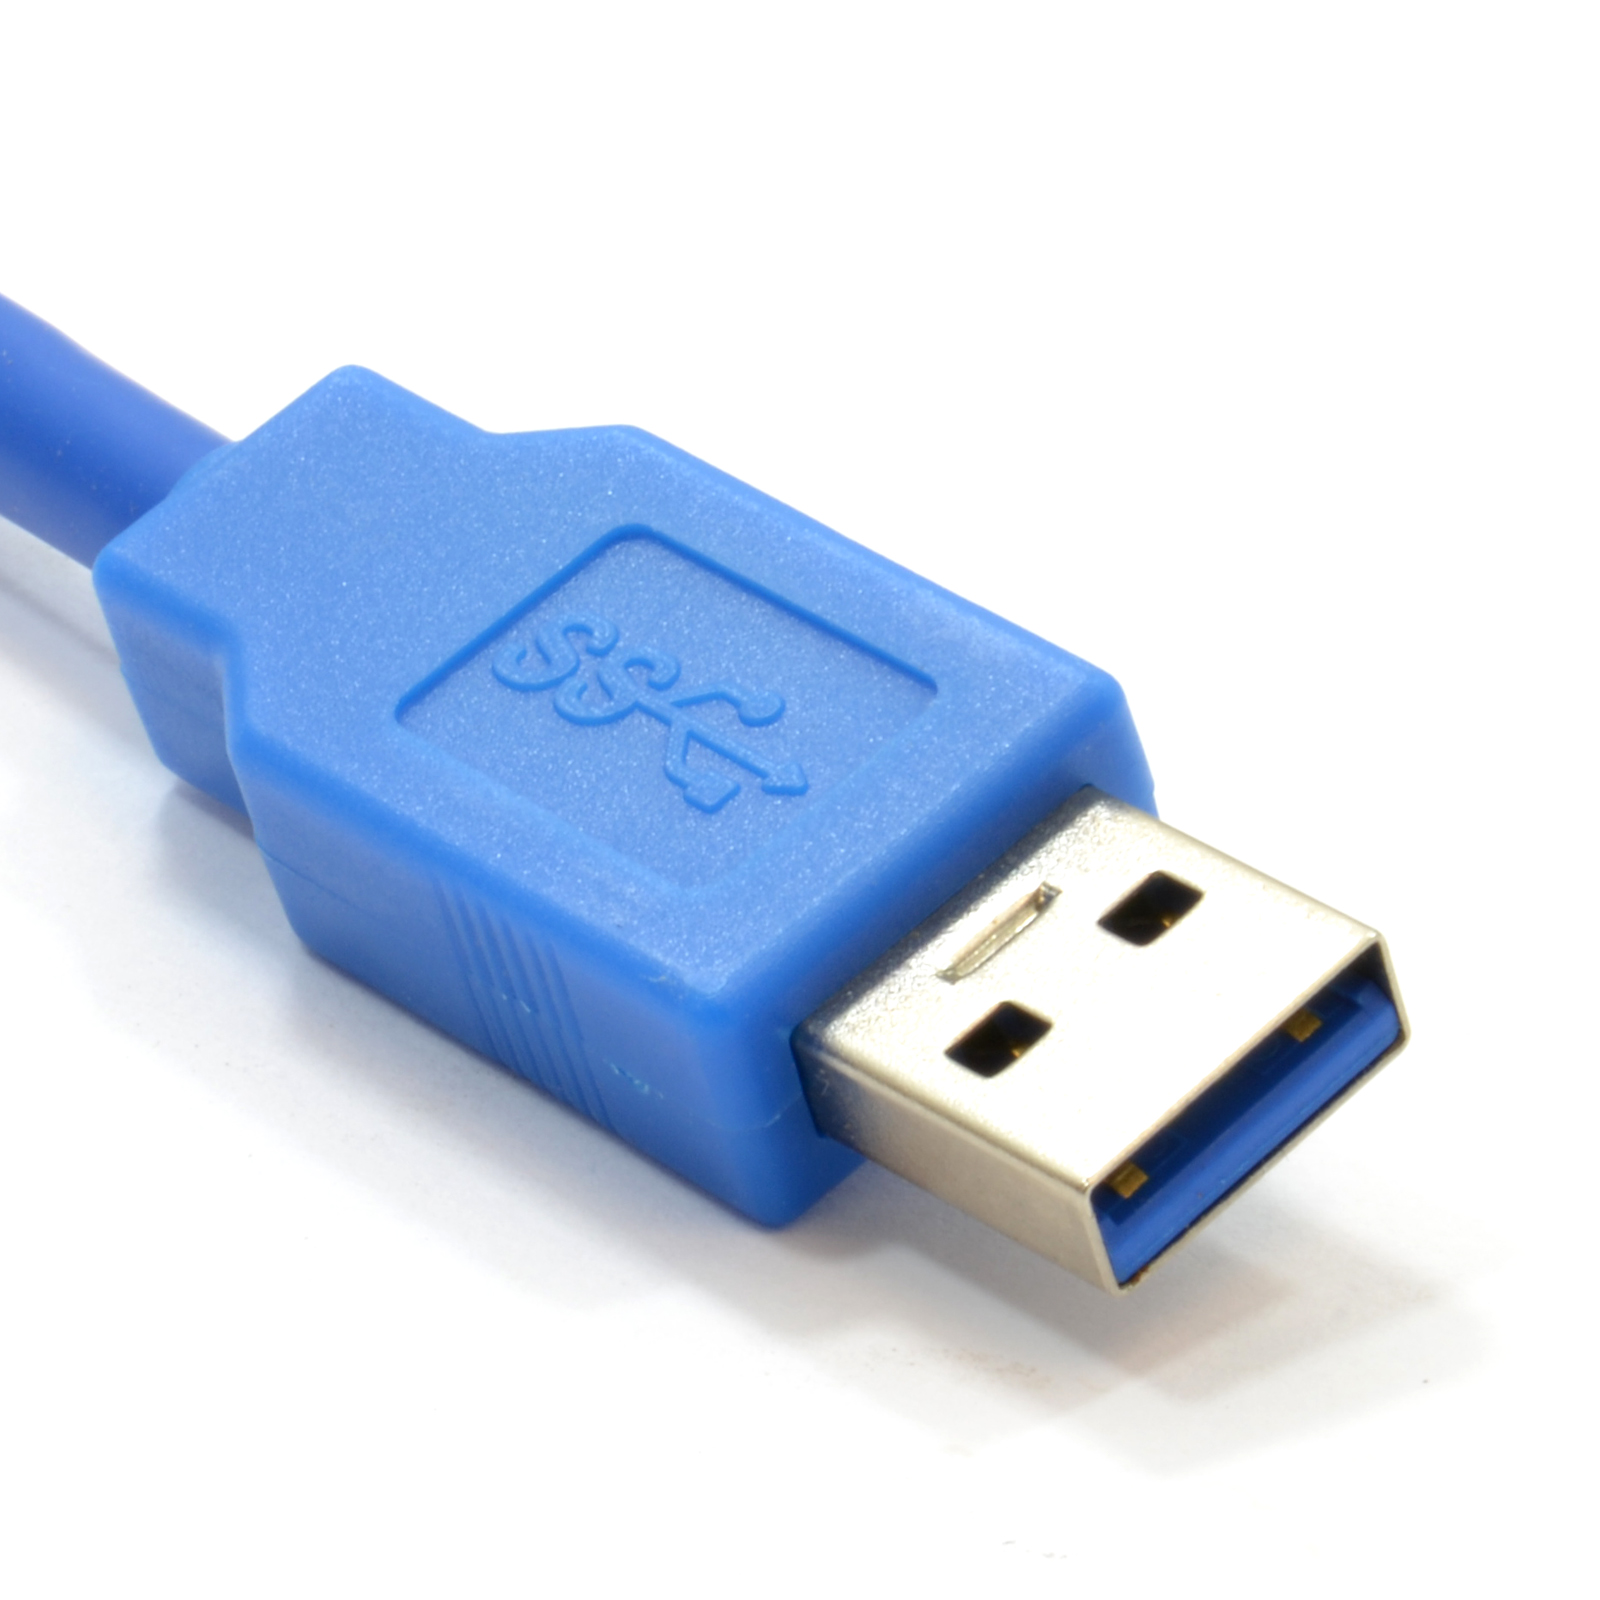 USB 3.0 SuperSpeed Cable Type Plug A to Type B Plug BLUE 3m - USB3 ...